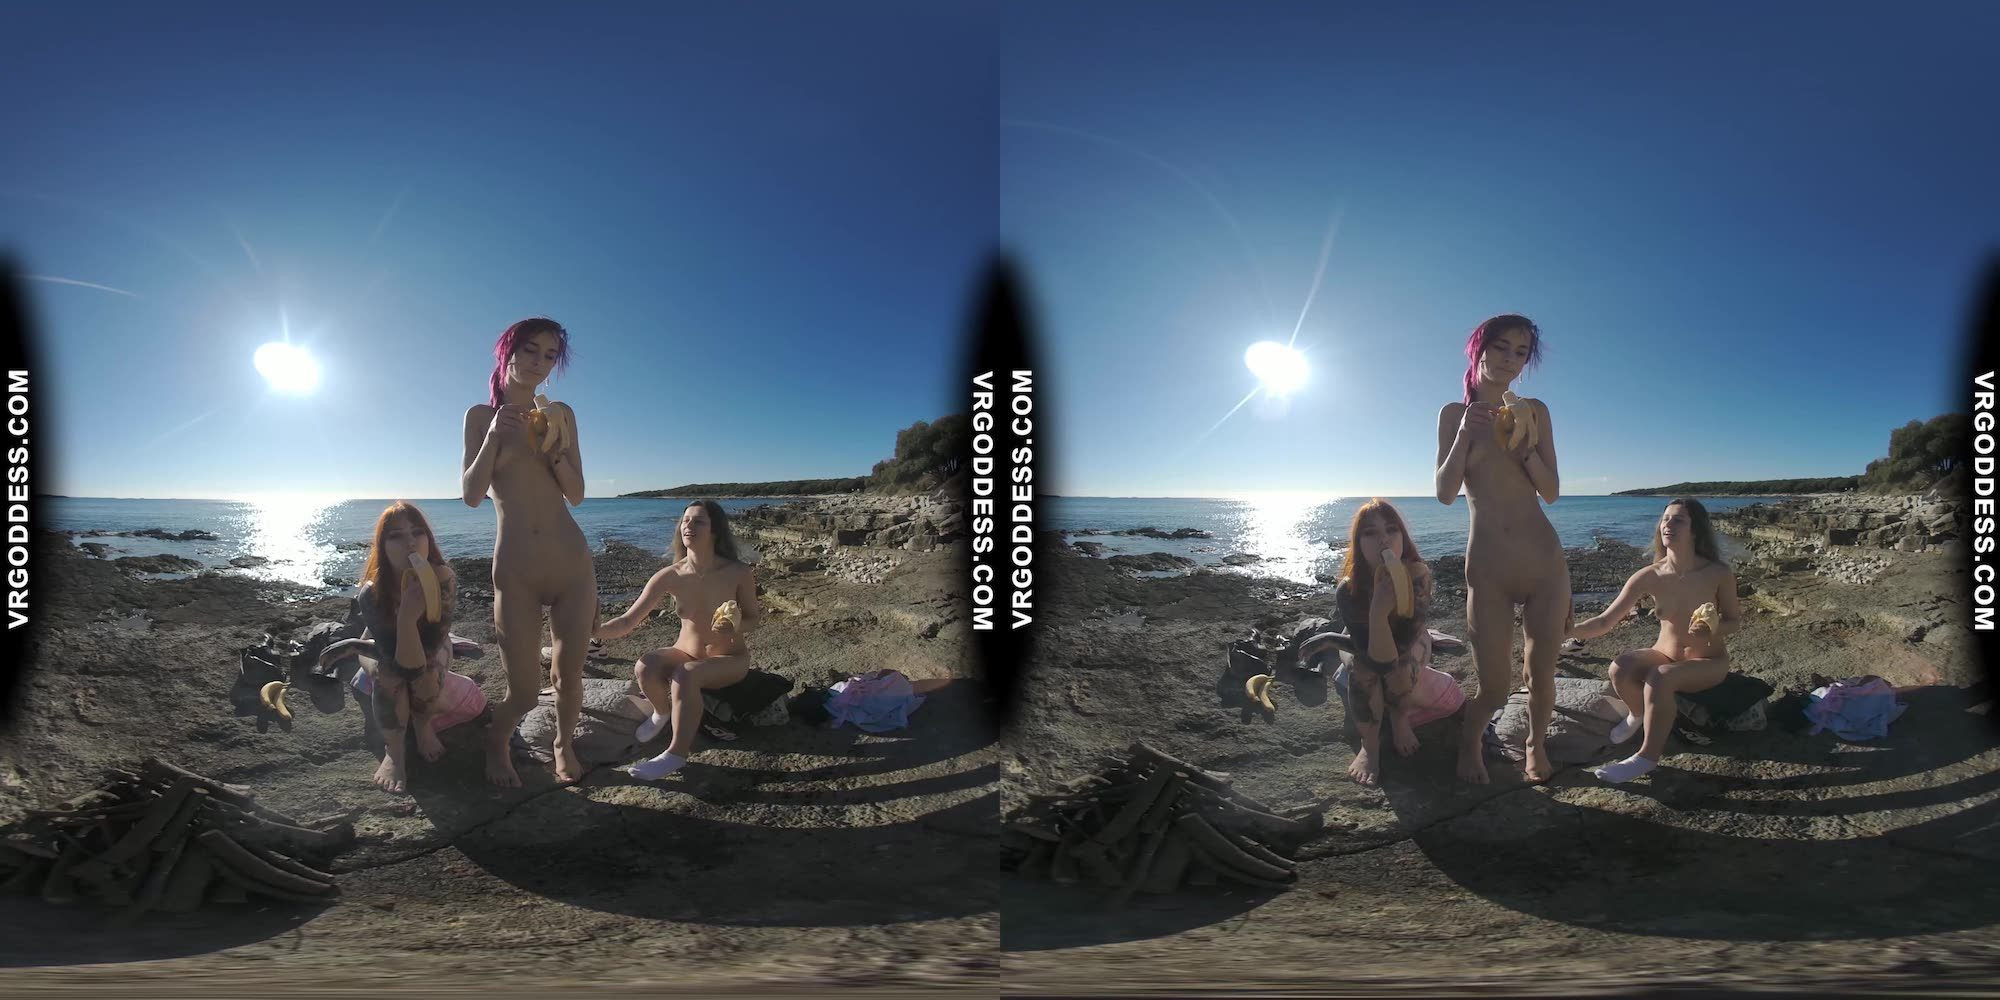 3 Hot Girls Getting Naked On Beach During Winter Making Fire Eating... Slideshow